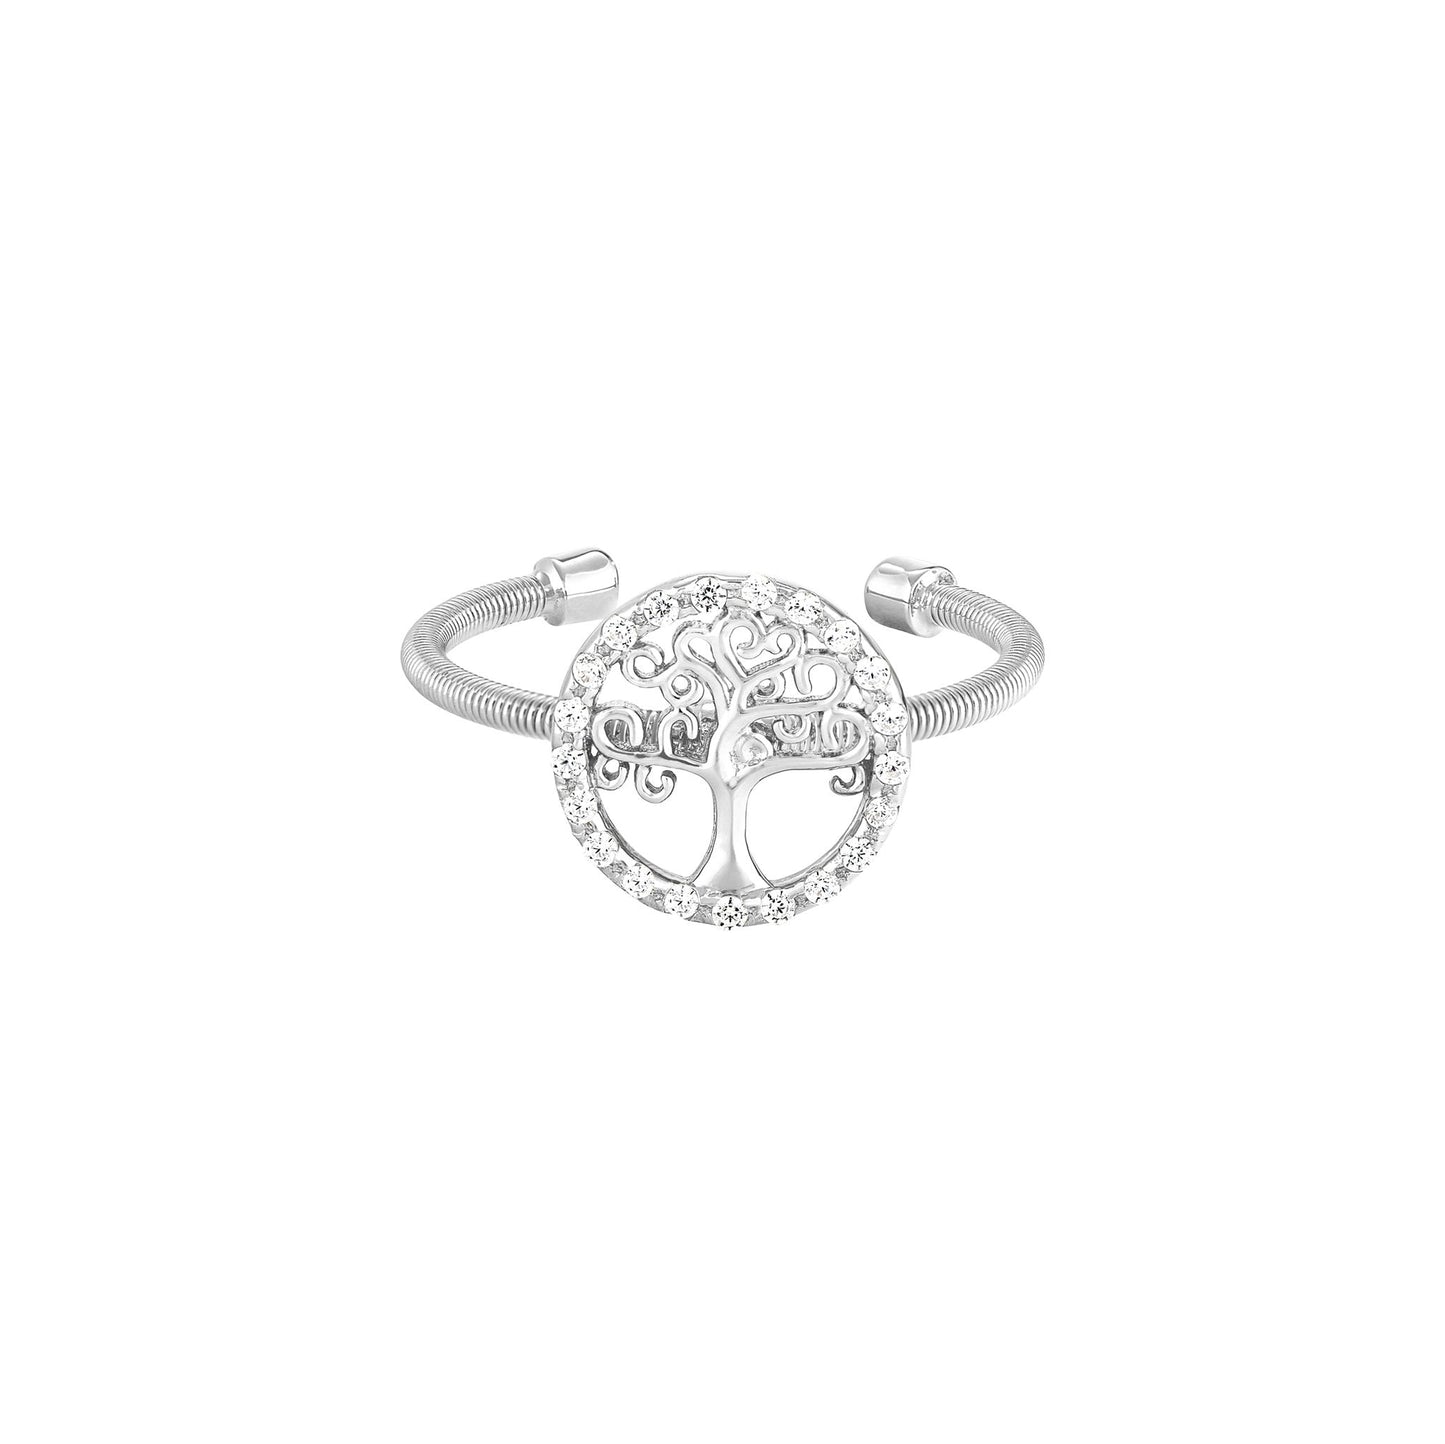 A cable tree ring with simulated diamonds displayed on a neutral white background.